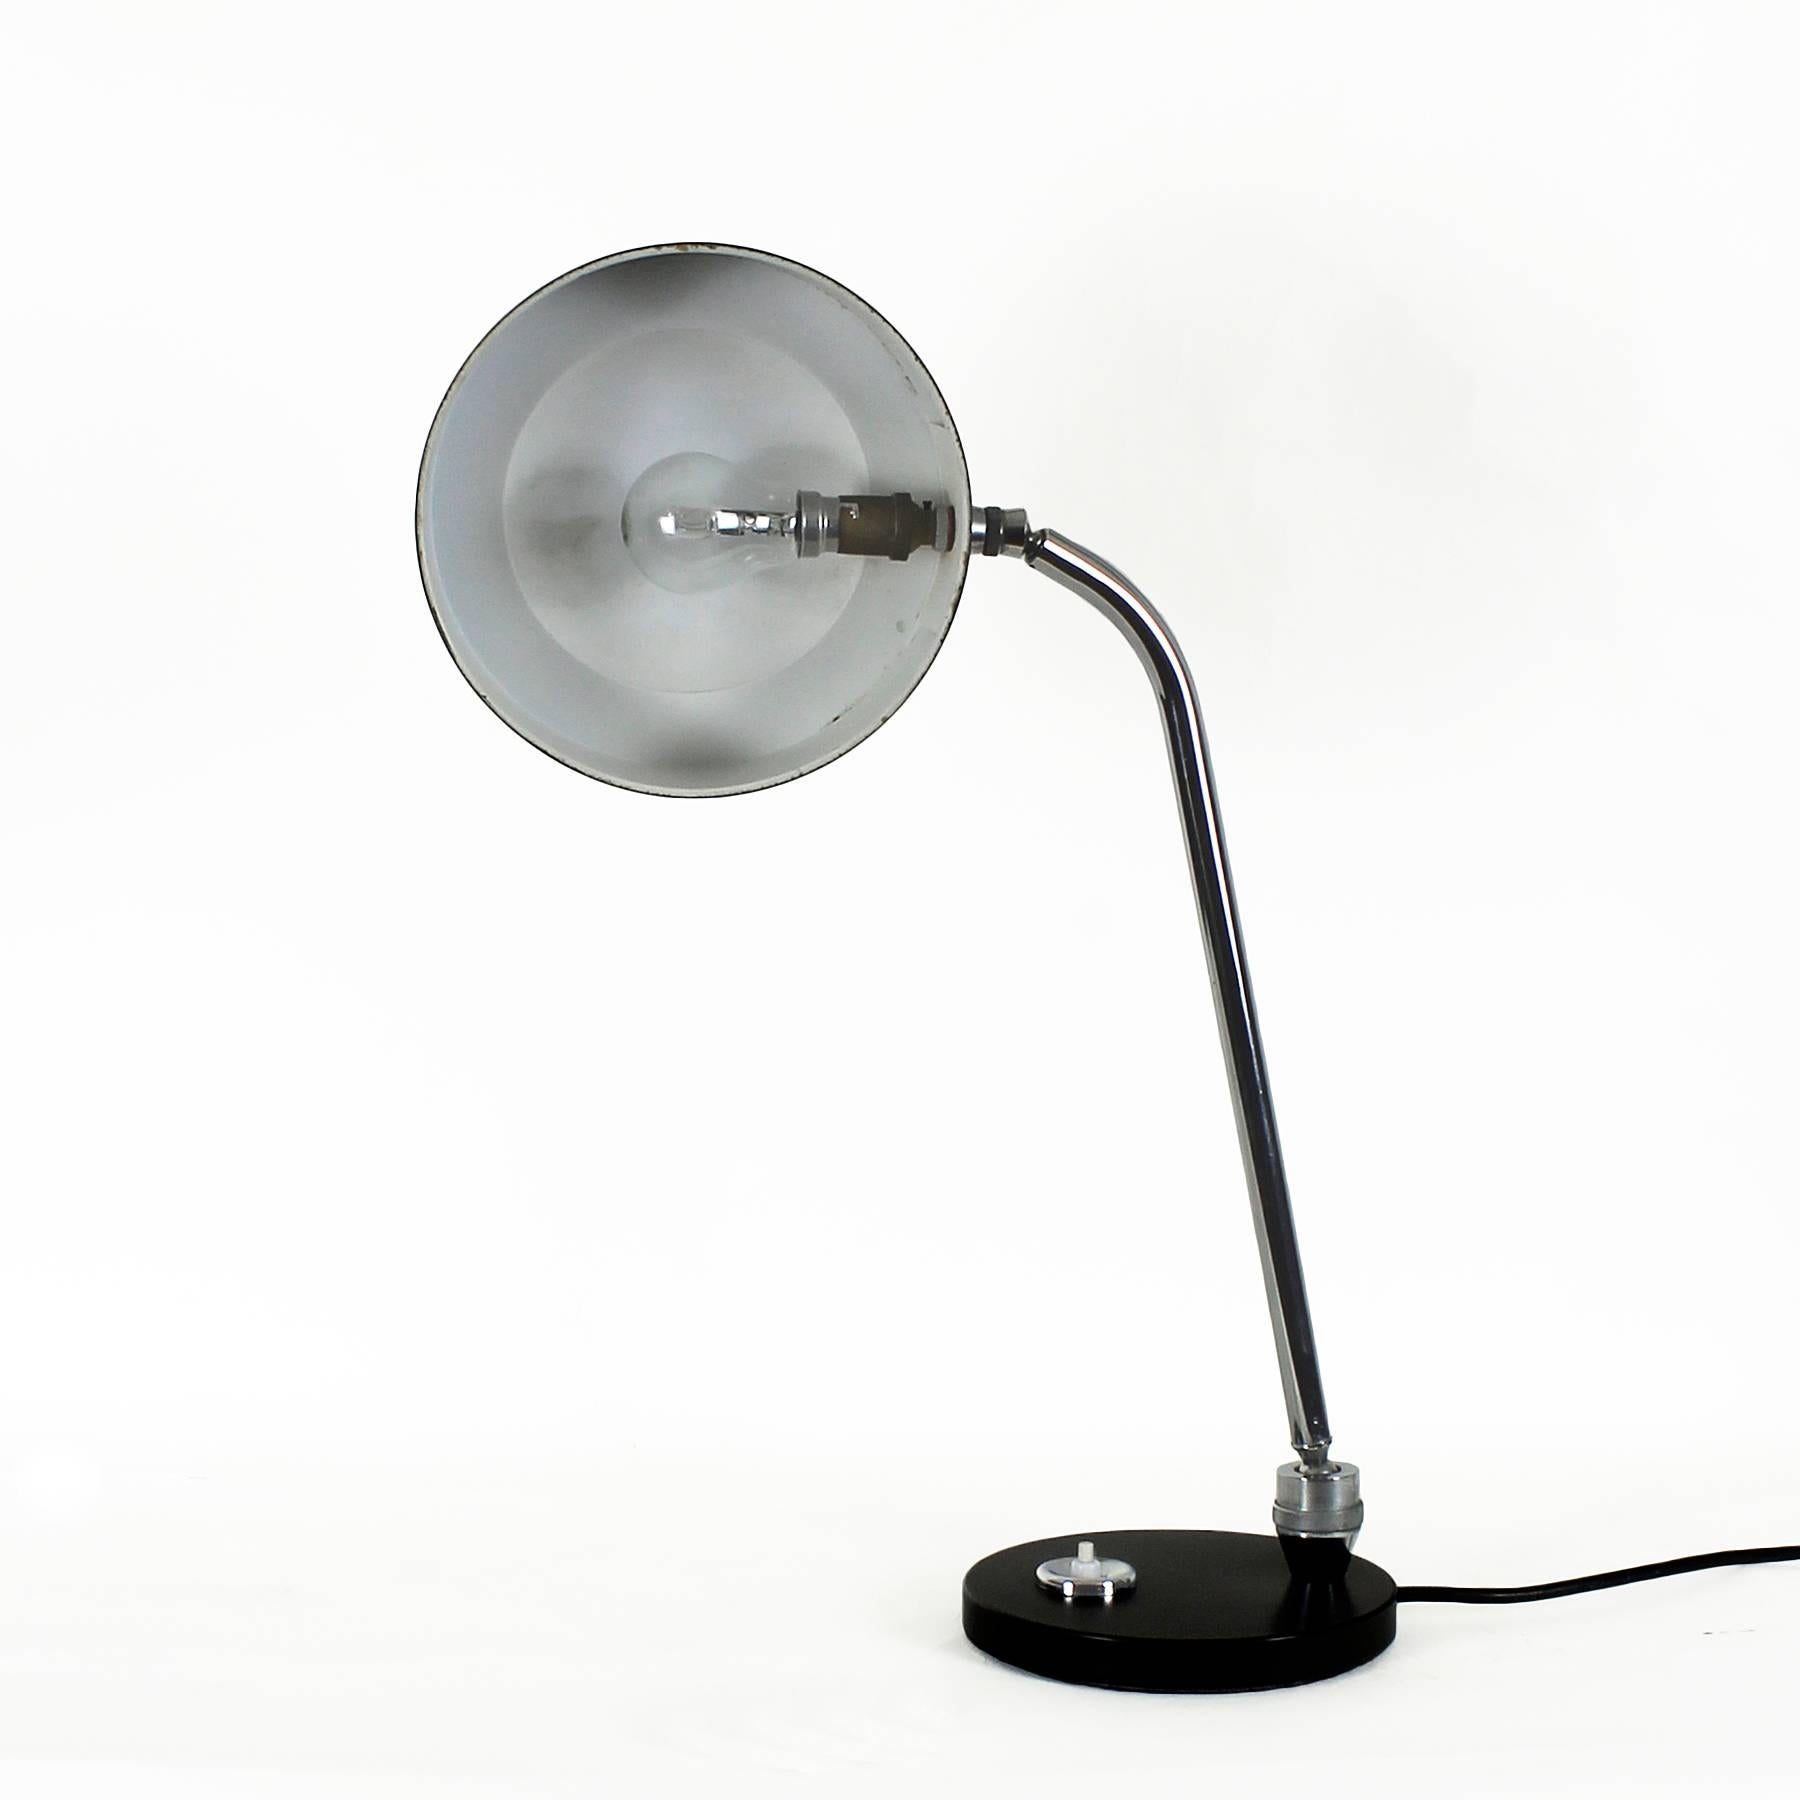 Mid-20th Century Pair of Mid-Century Modern Desk Lamps by André Mounique for Maison Jumo - France For Sale